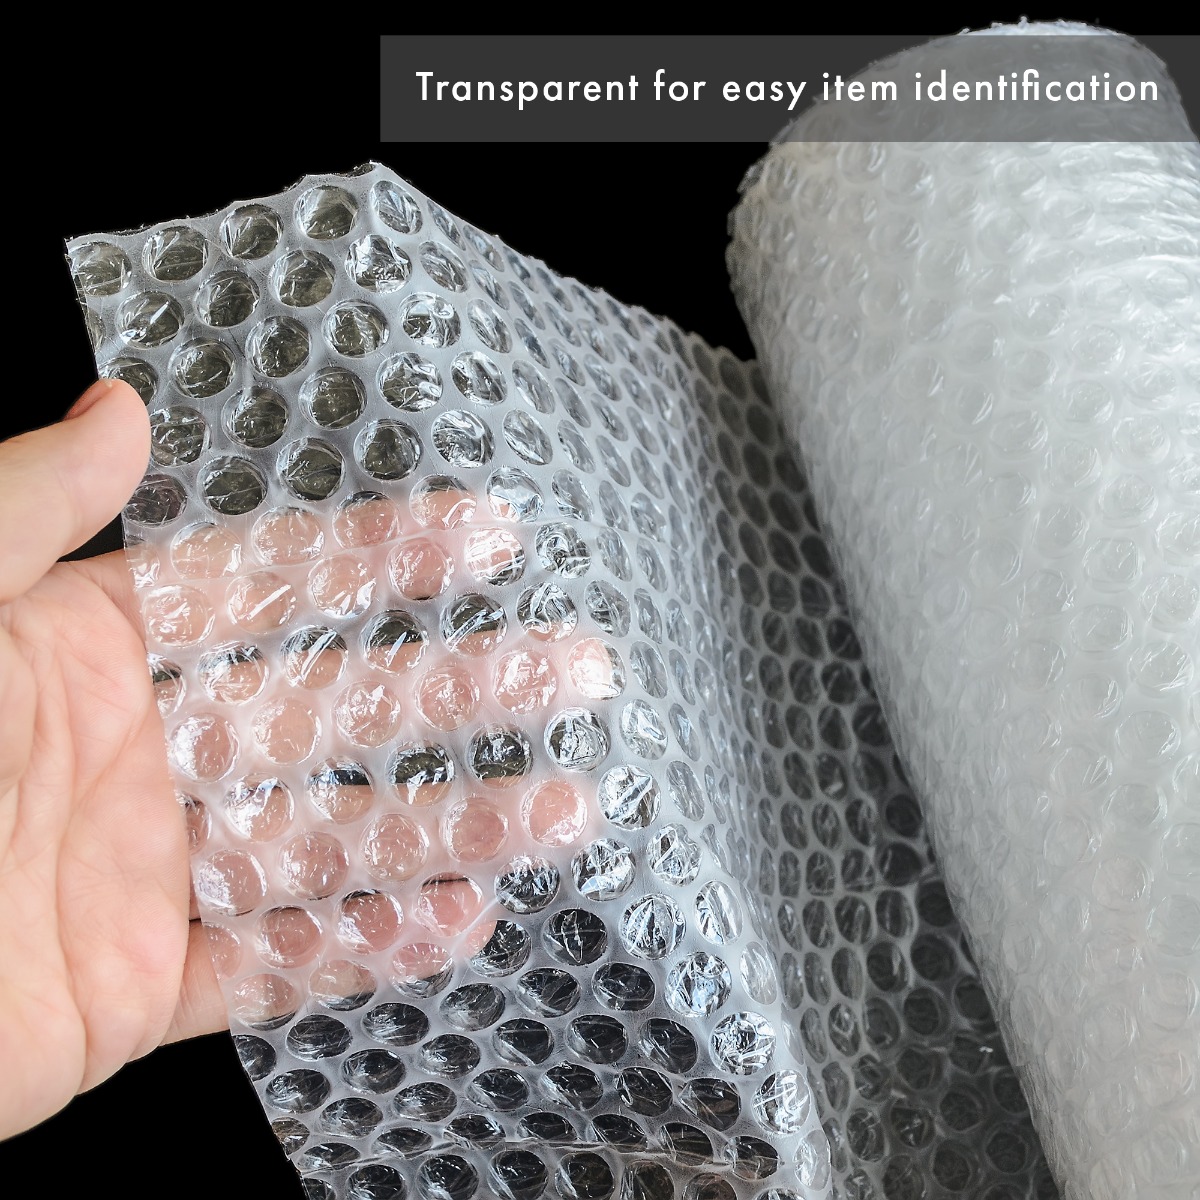 A Definitive Guide to Recycle Bubble Wrap - GreenCitizen